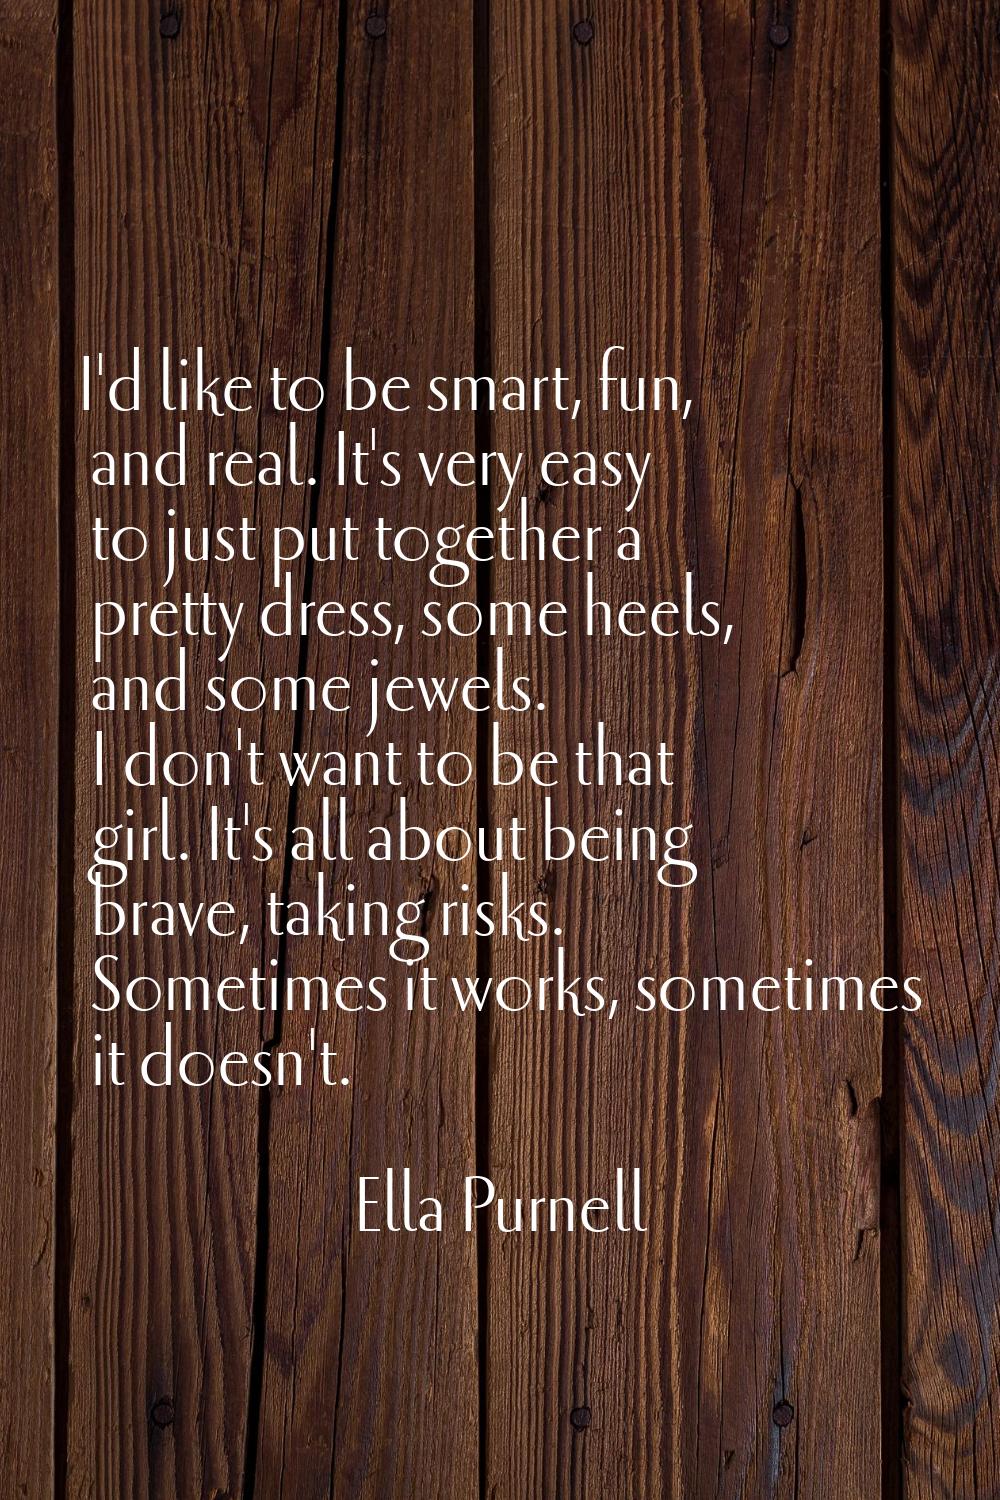 I'd like to be smart, fun, and real. It's very easy to just put together a pretty dress, some heels